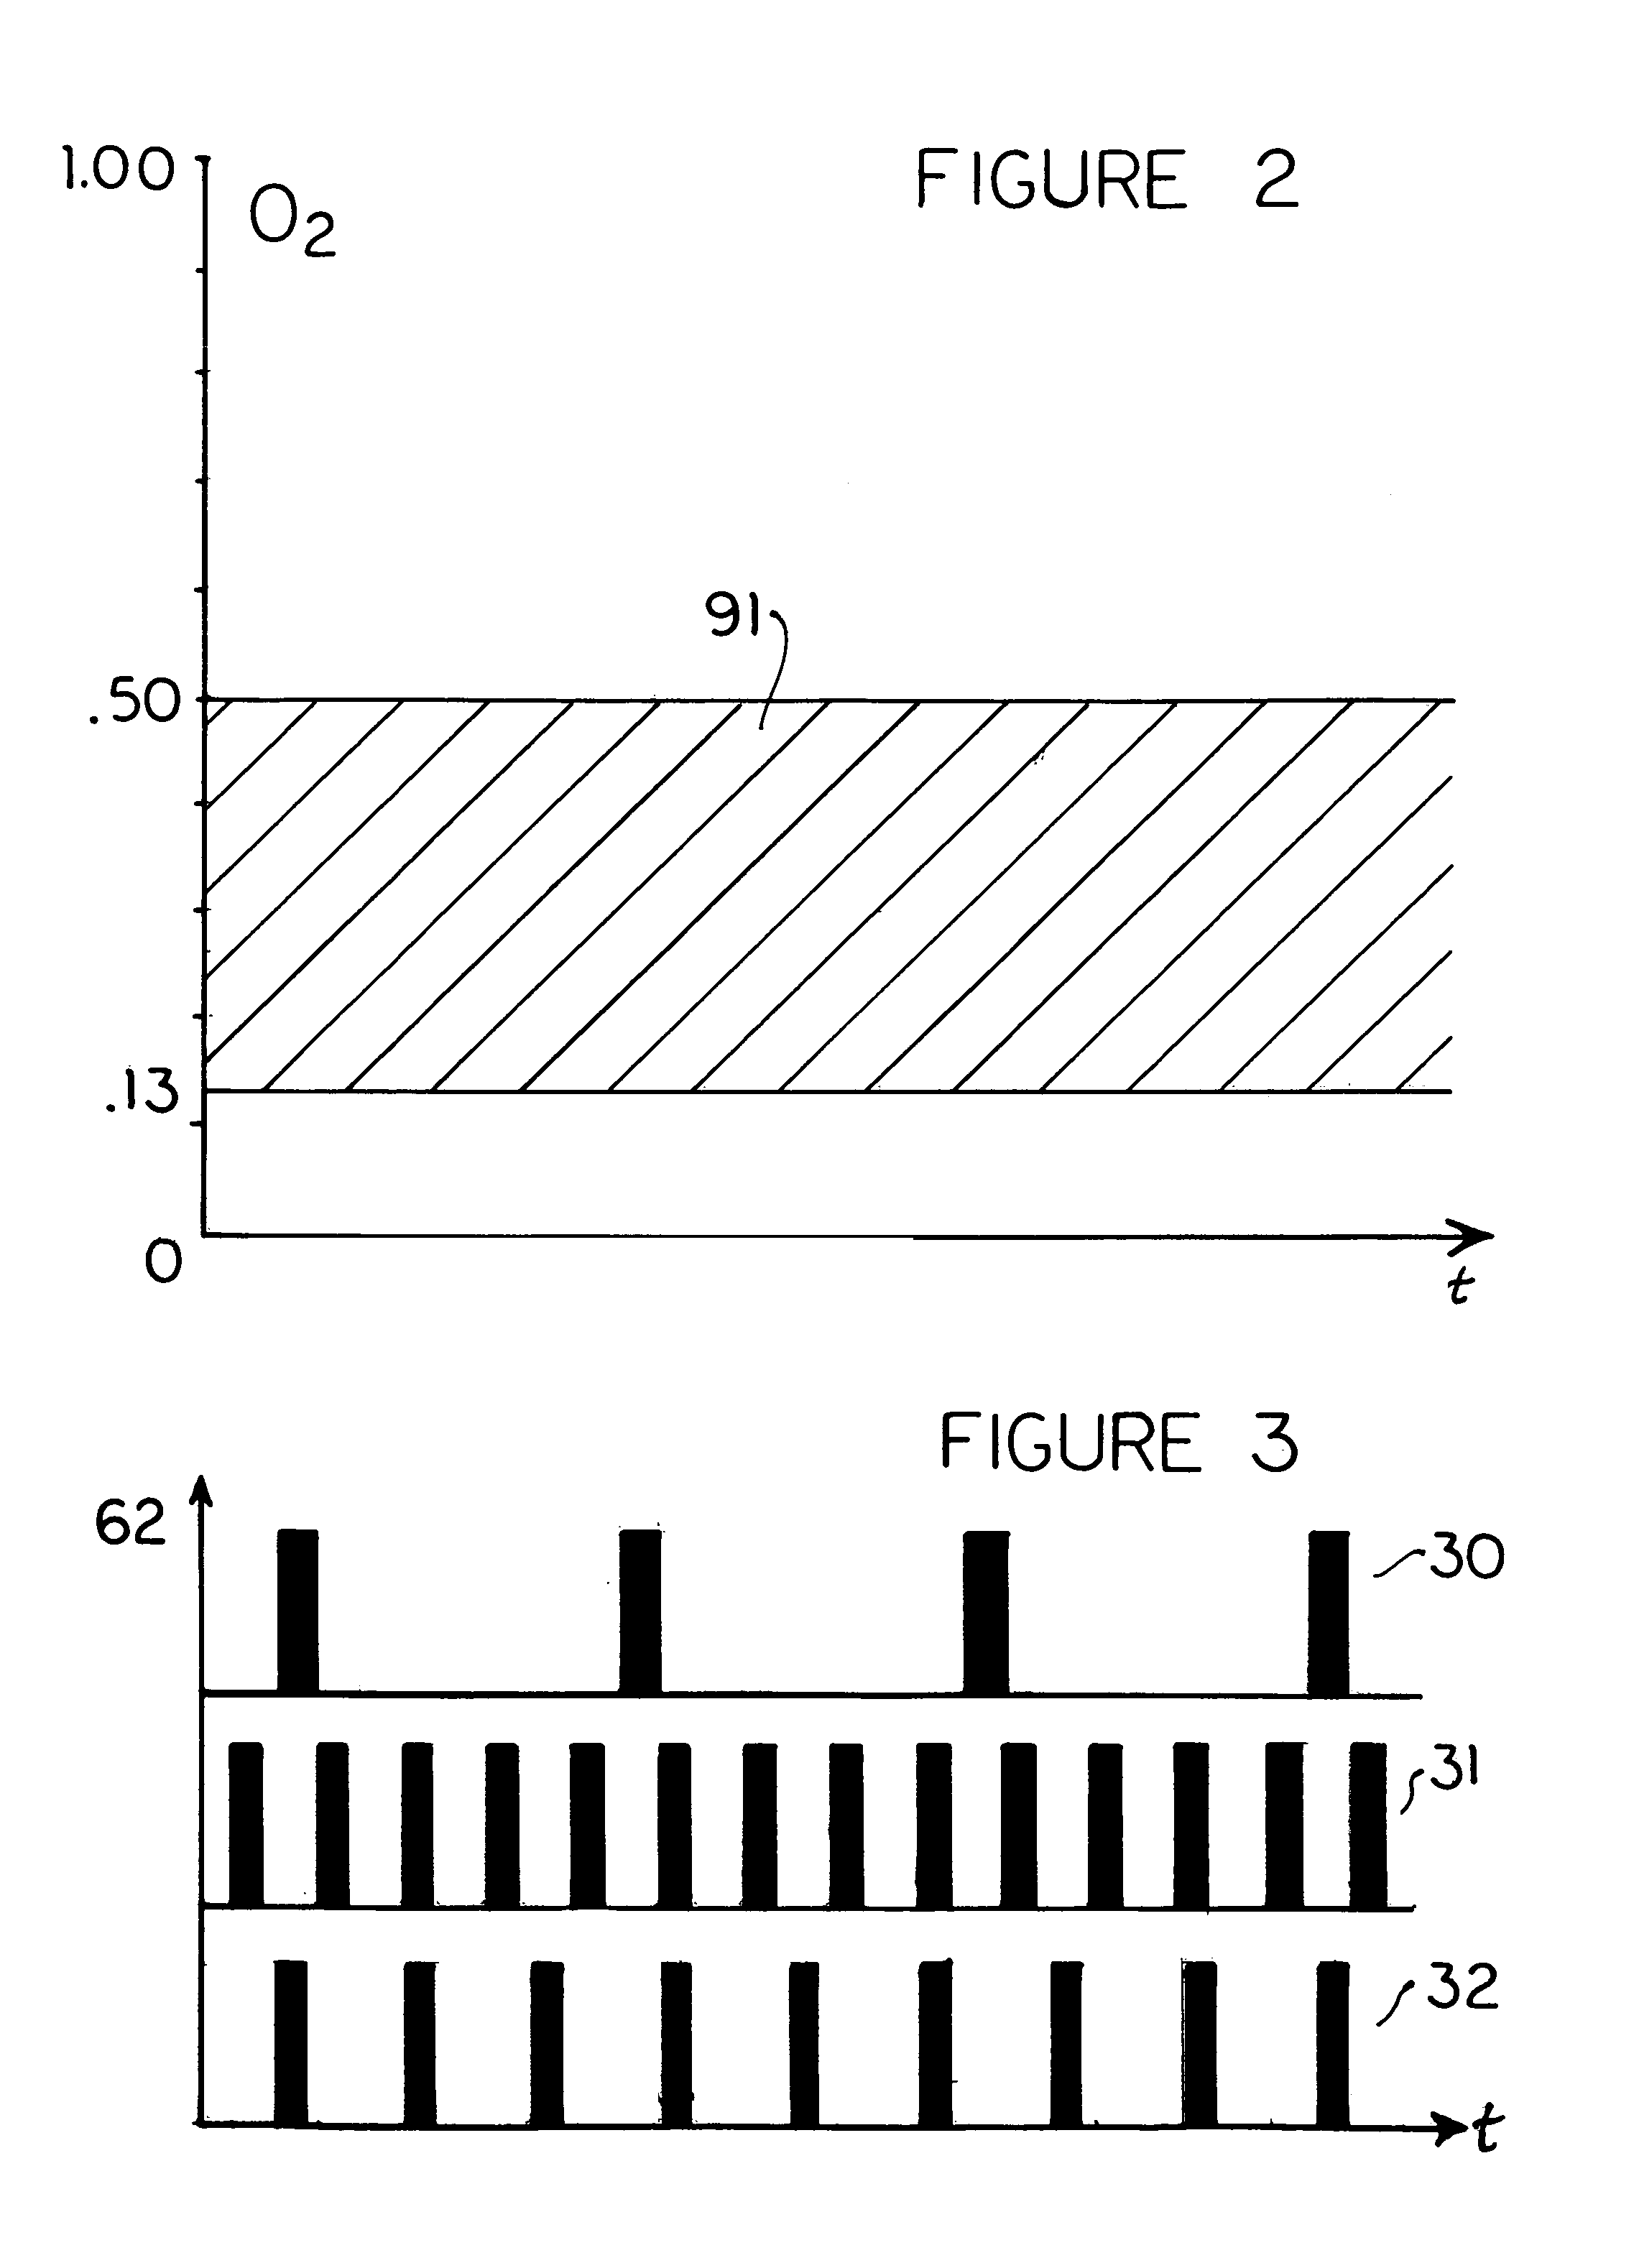 Self contained breathing apparatus control system for atmospheric use